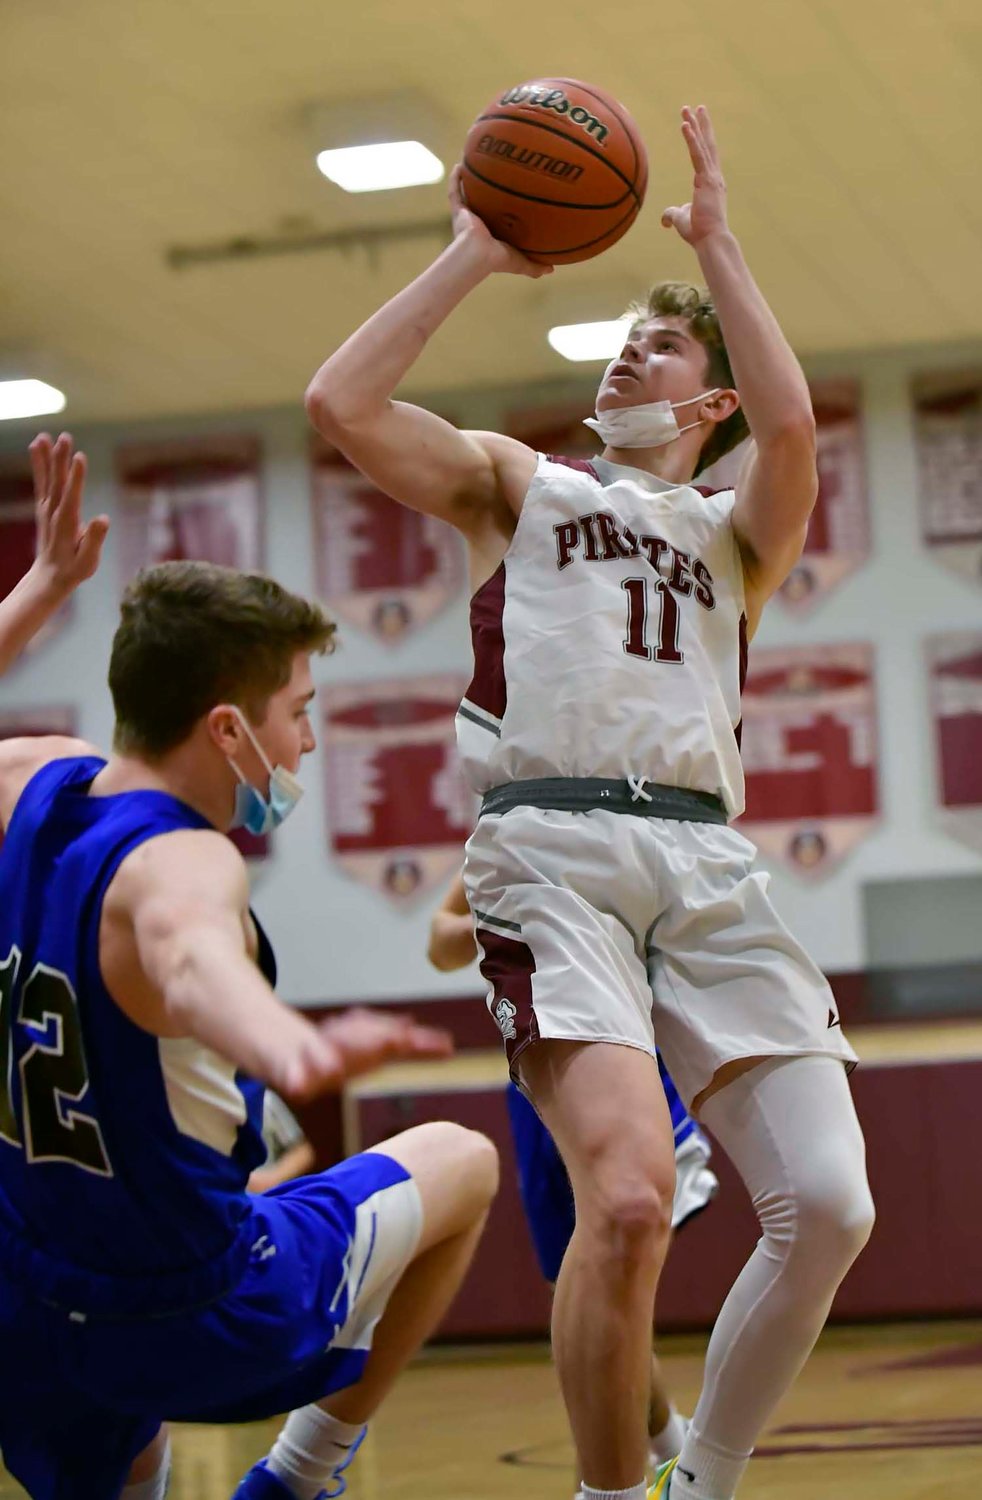 Mepham senior Robert Tansey, right poured in a game-high 27 points on Jan. 6 but the Pirates fell short against Long Beach after a strong first half.